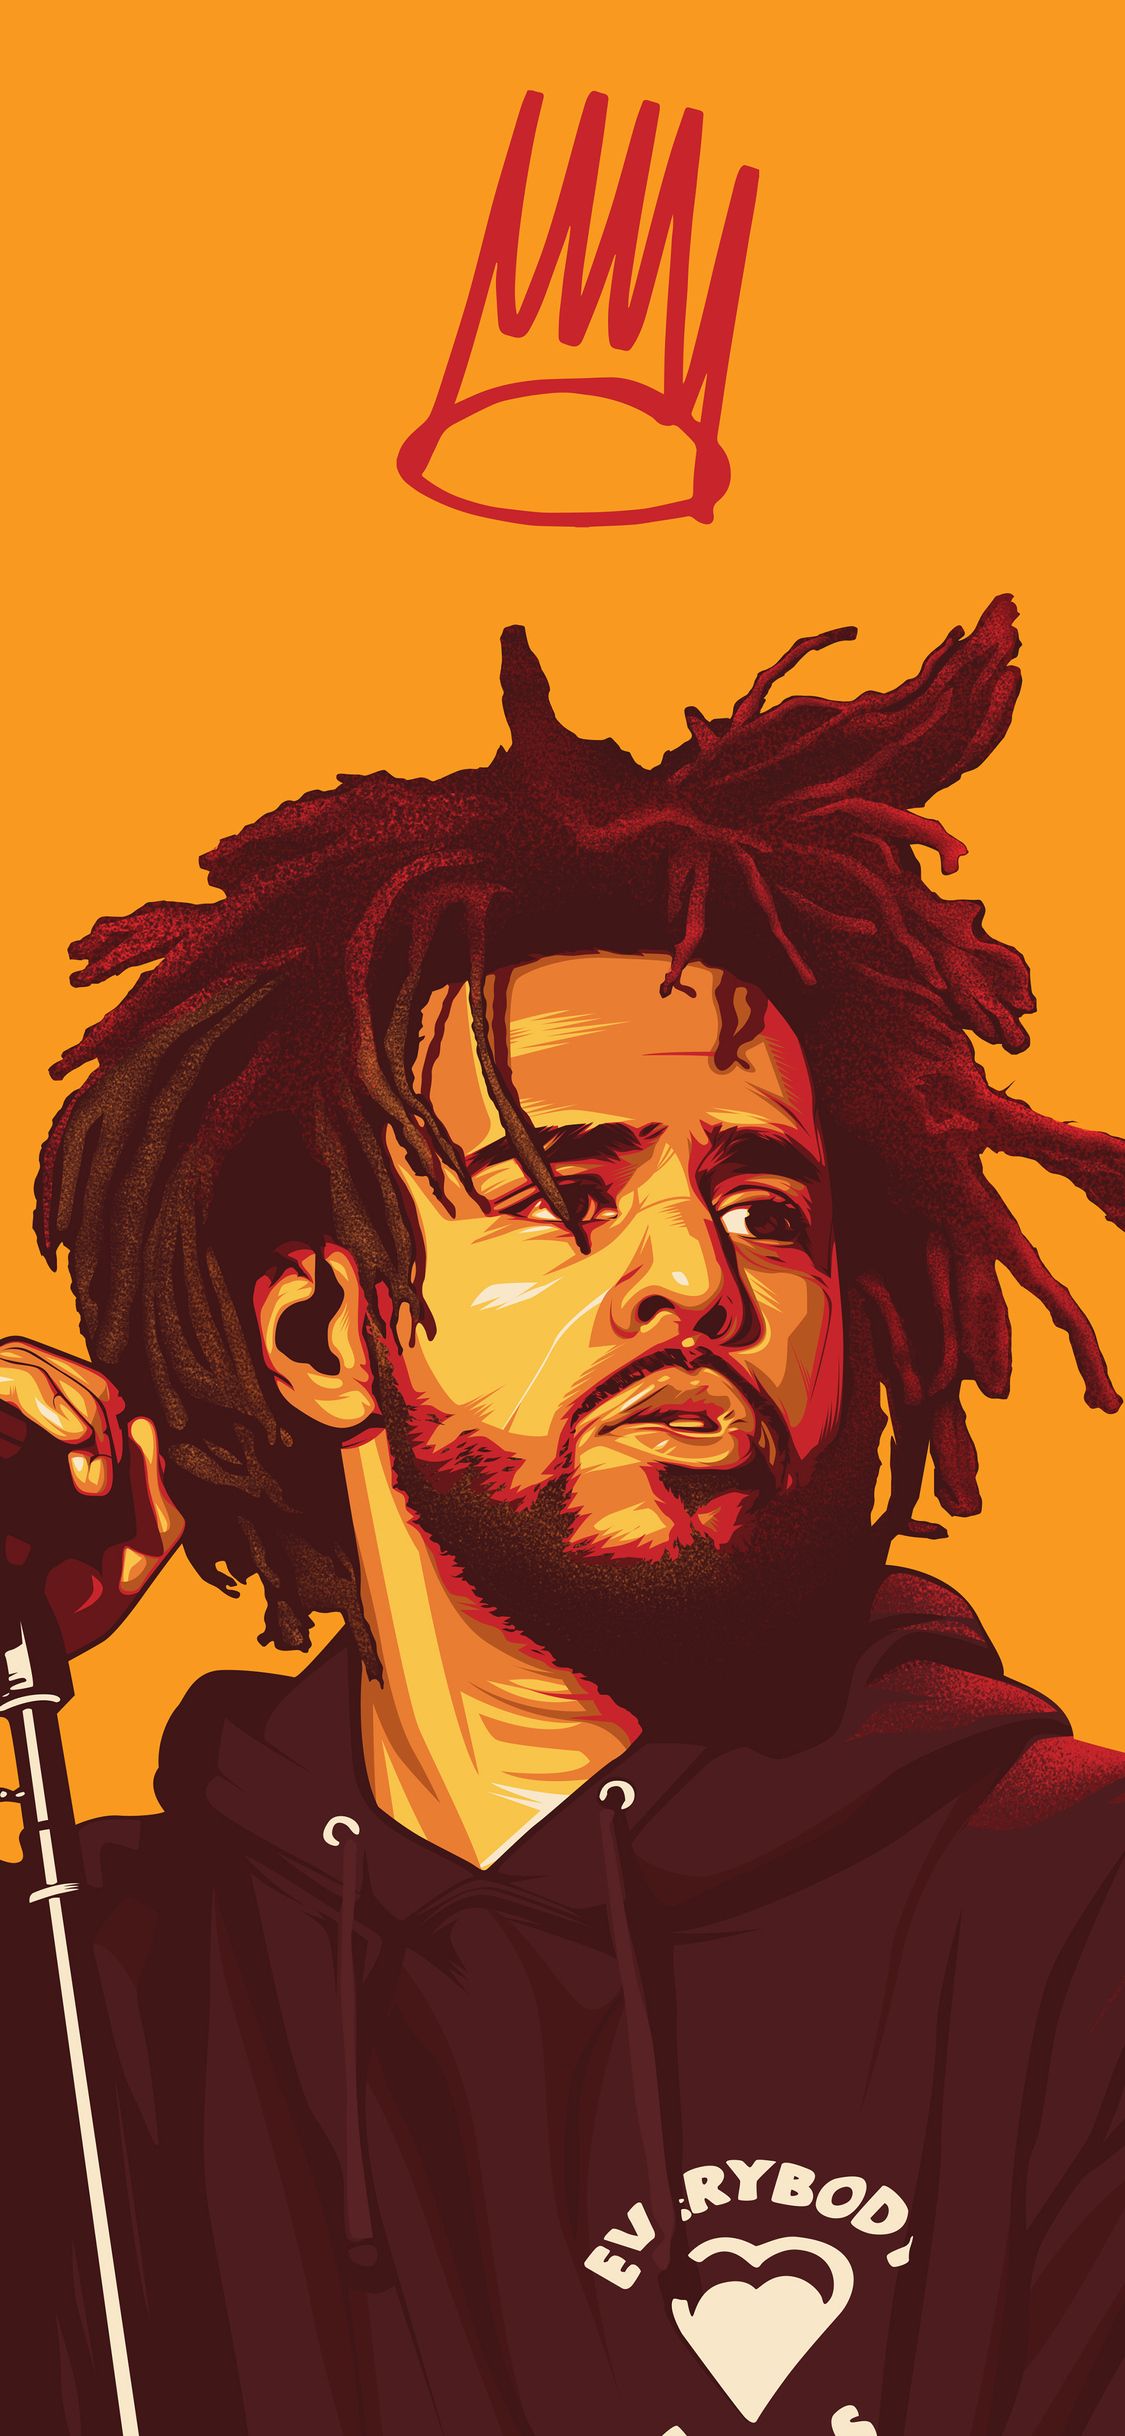 Awesome J Cole iPhone Wallpaper HD